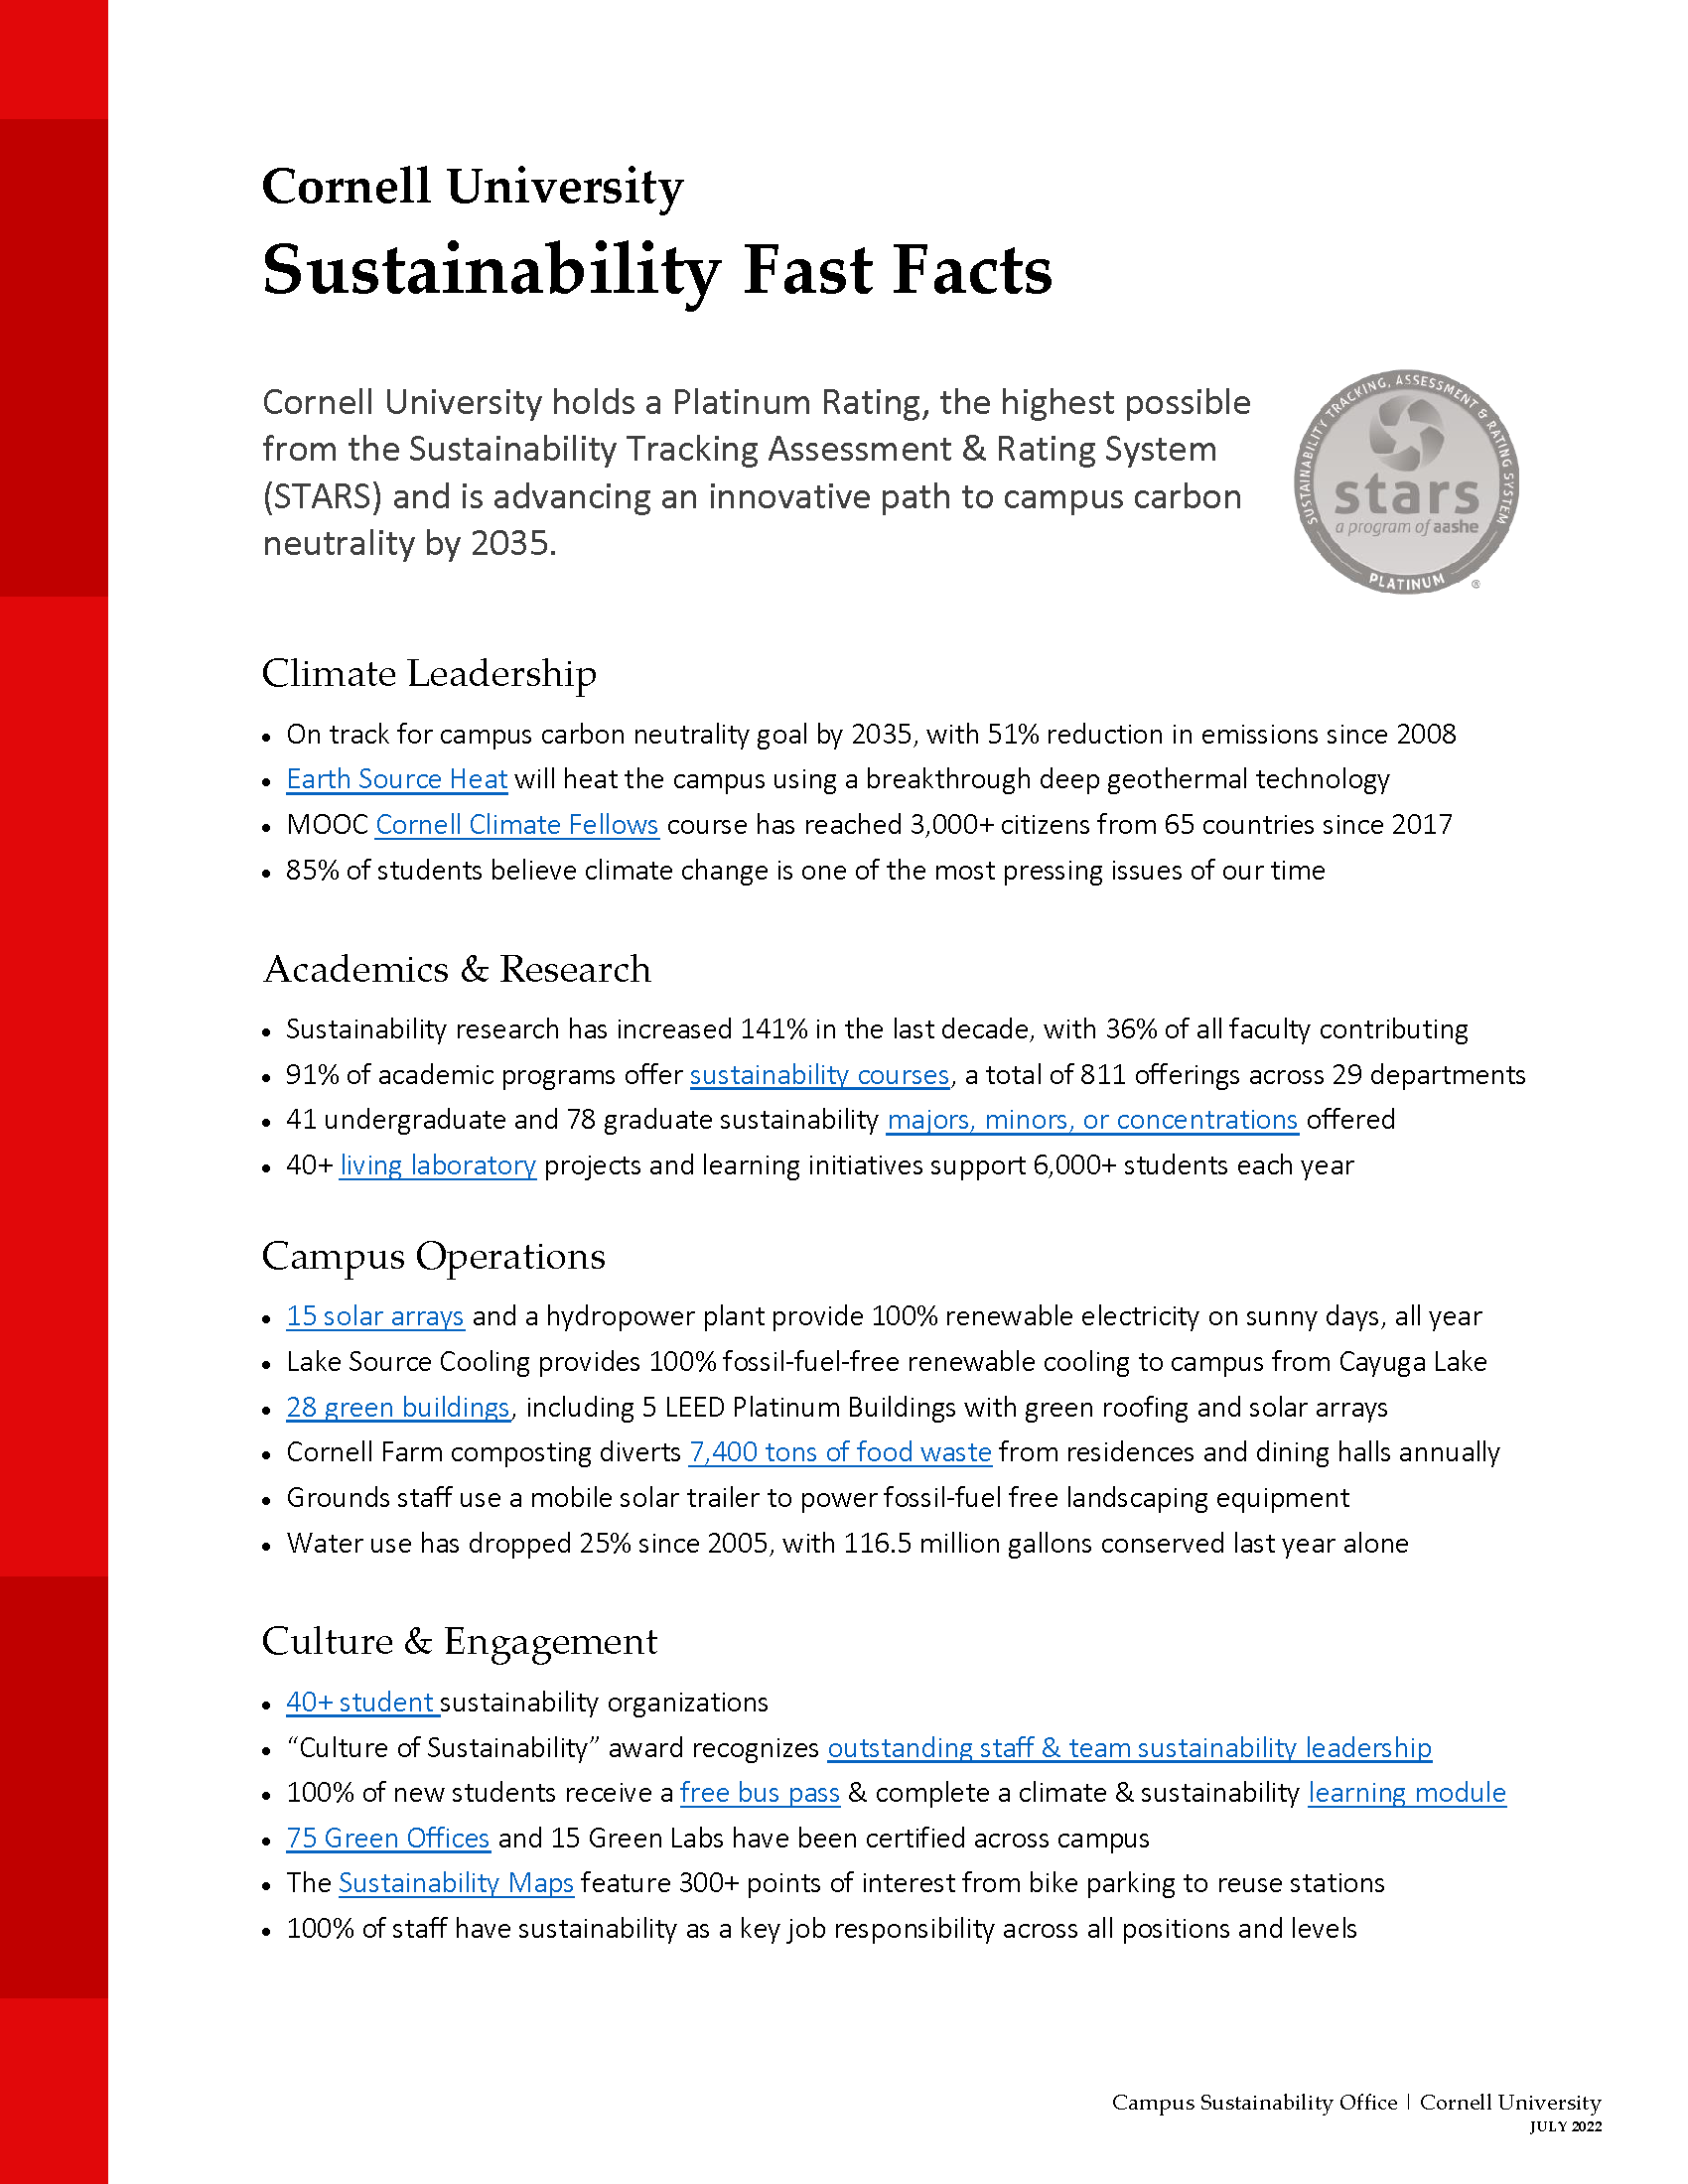 PDF of Cornell Fast Facts on Sustainability